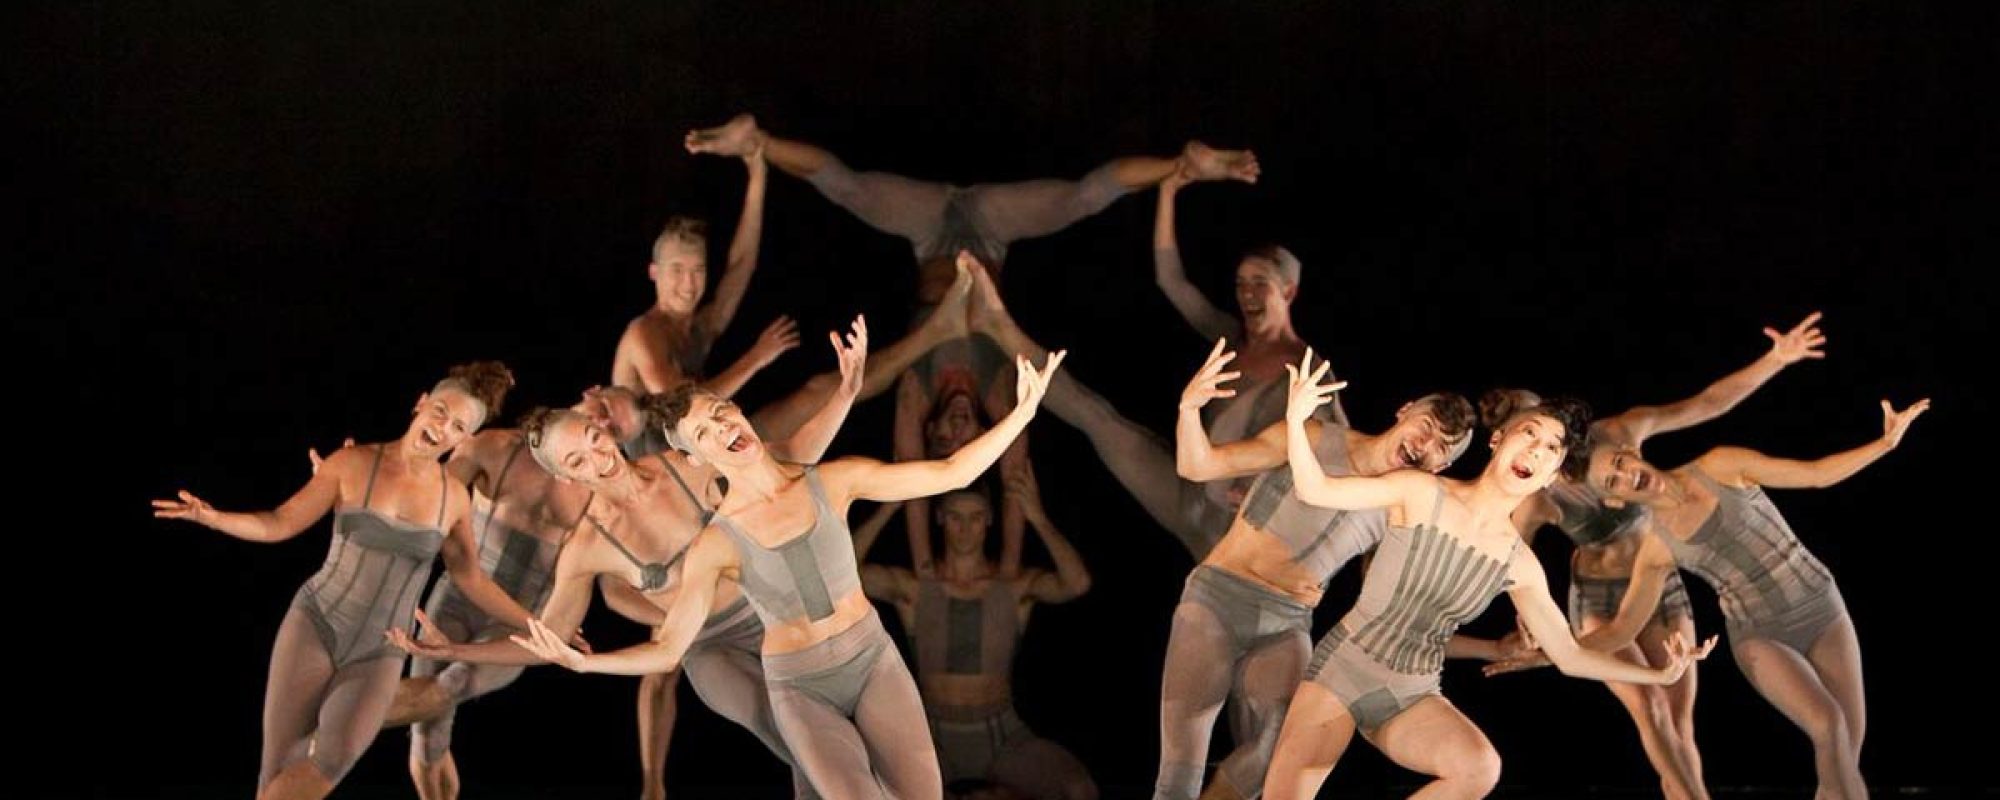 First Choreographer ‘Artist in Residence’ at The Met Also Started Gallim Dance Company